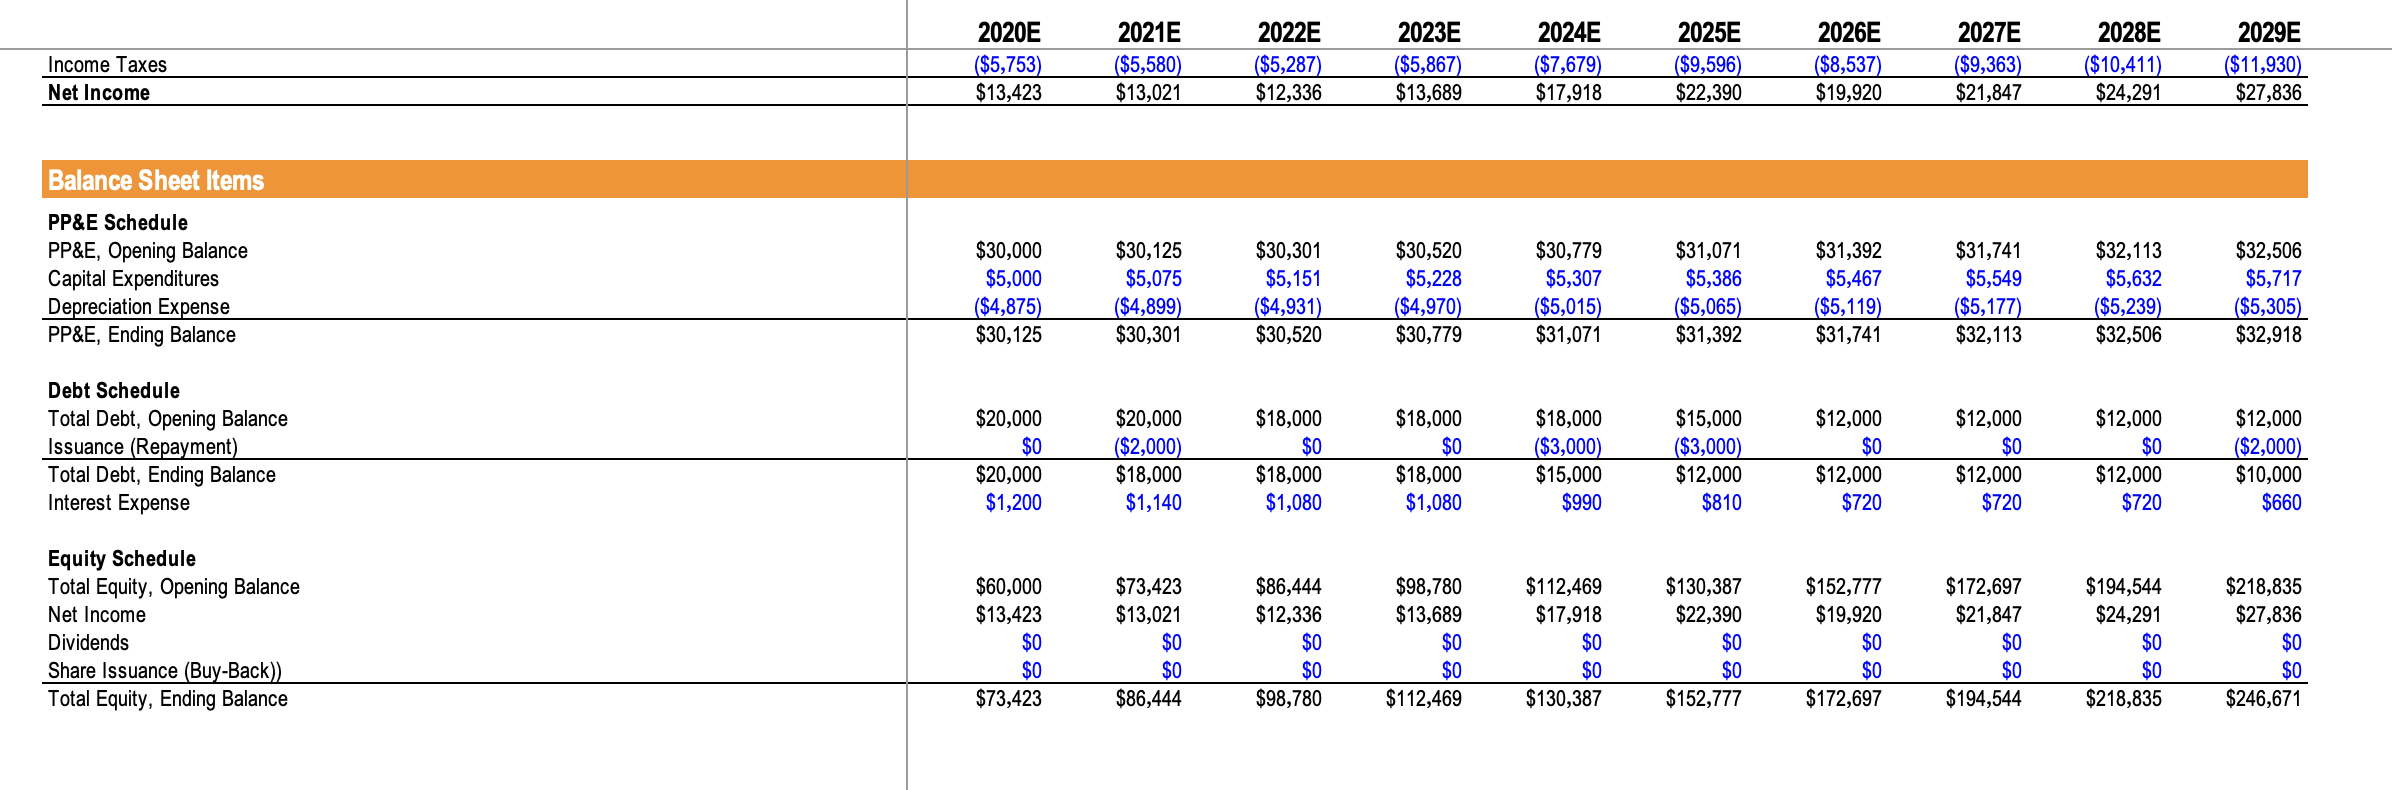 Weighted Average Cost of Capital (WACC) – Excel Template – 365 Financial  Analyst